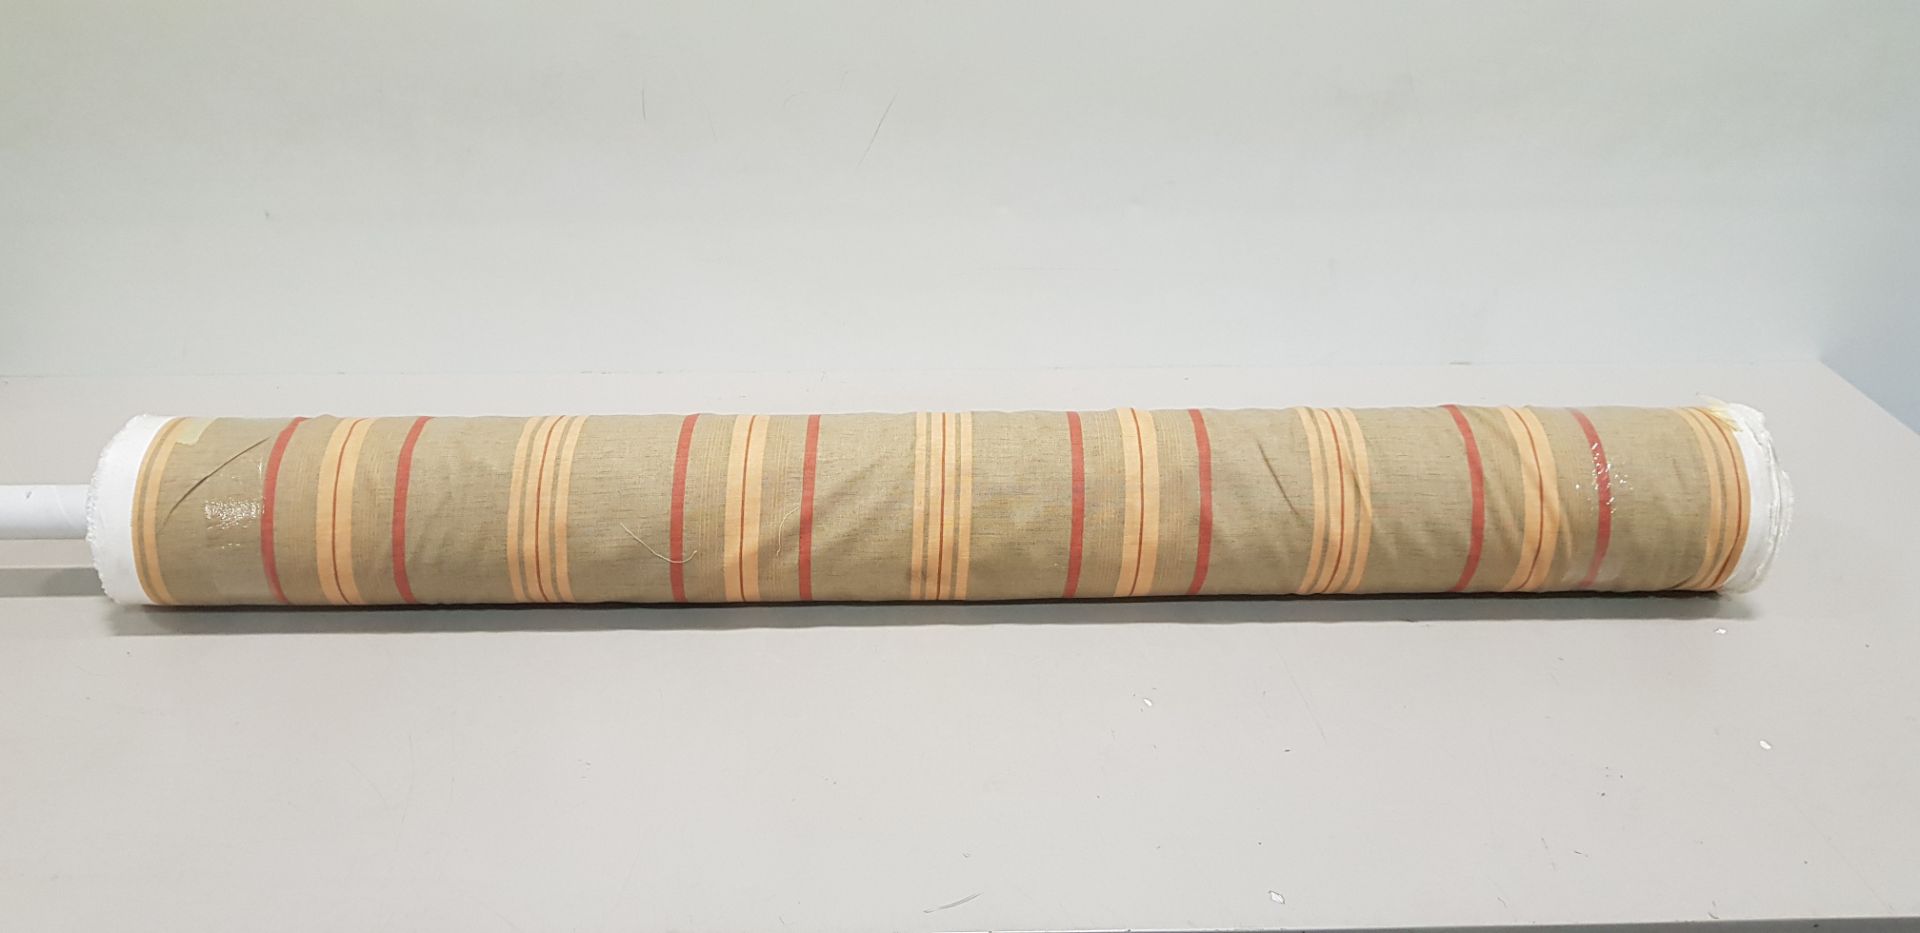 1 X ROLL OF FABRIC IN IN BROWN AND RED / ORANGE LIND DESIGN - THE LENGTH 49M £12.99 / M - TOTAL £